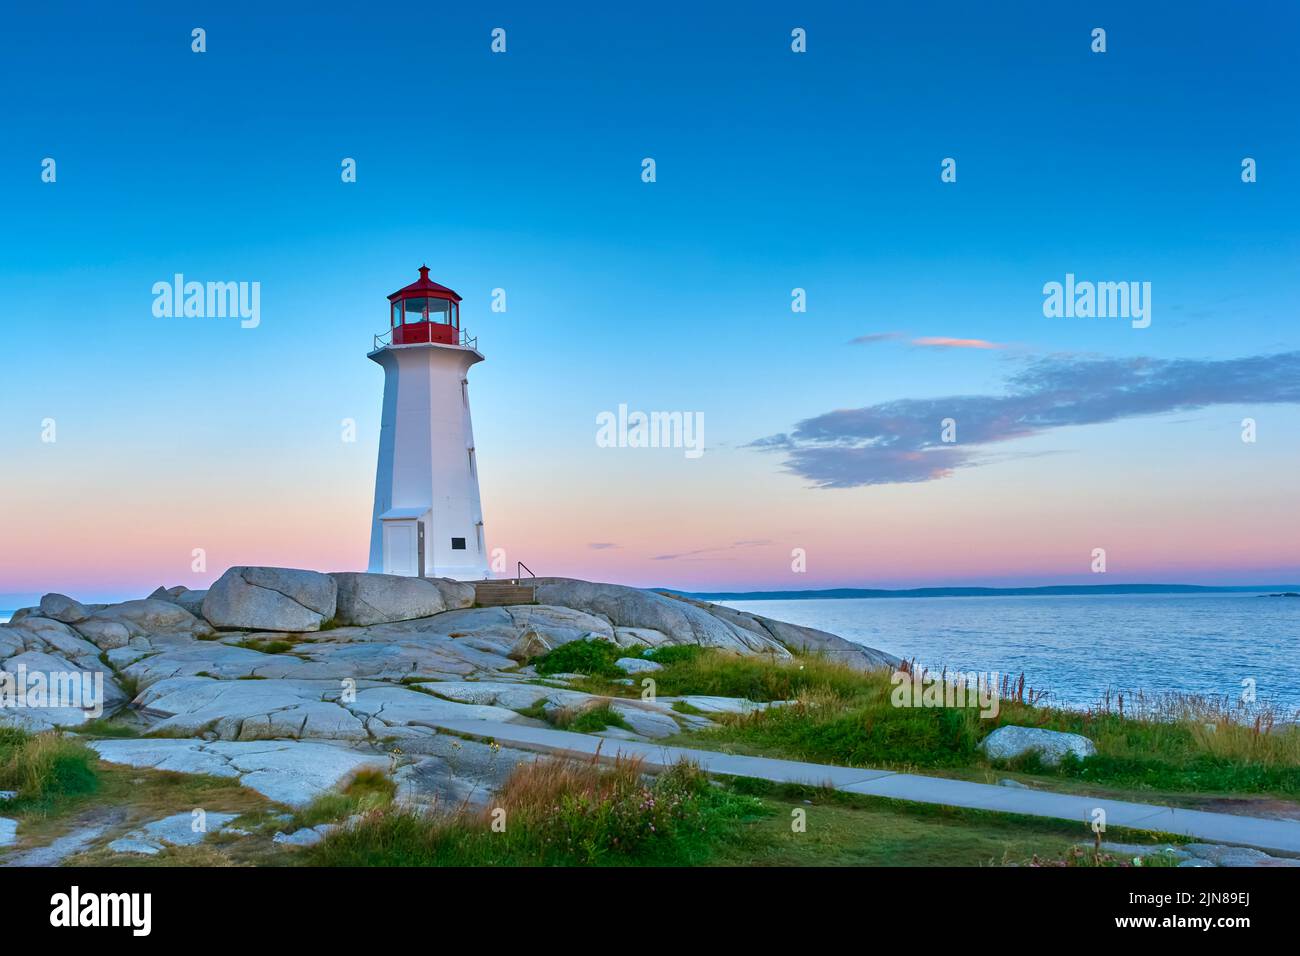 Photograph of the iconic Peggy's Cove lighthouse taken at sunrise on a beautiful summer morning.. Stock Photo